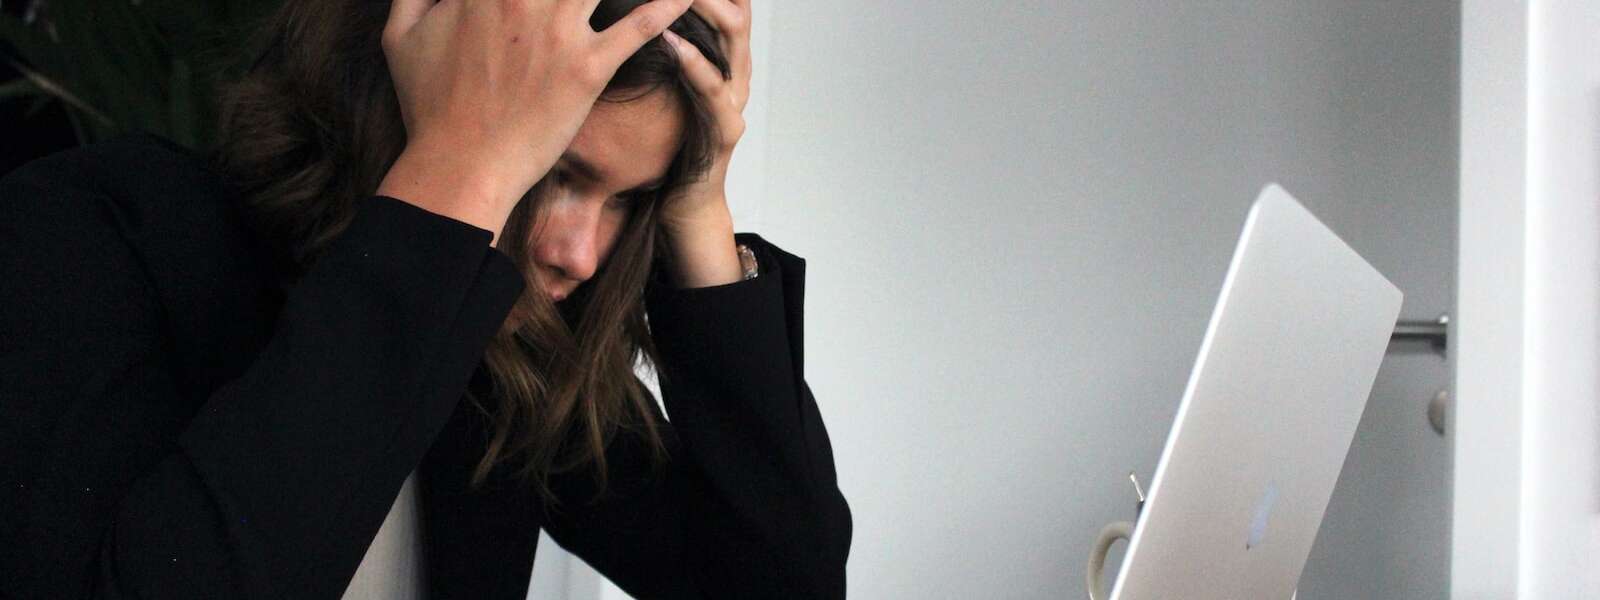 A person in black long sleeve shirt sits in front of their laptop. Their face is covered by their hands which are gripping their hair in a gesture expressing stress.